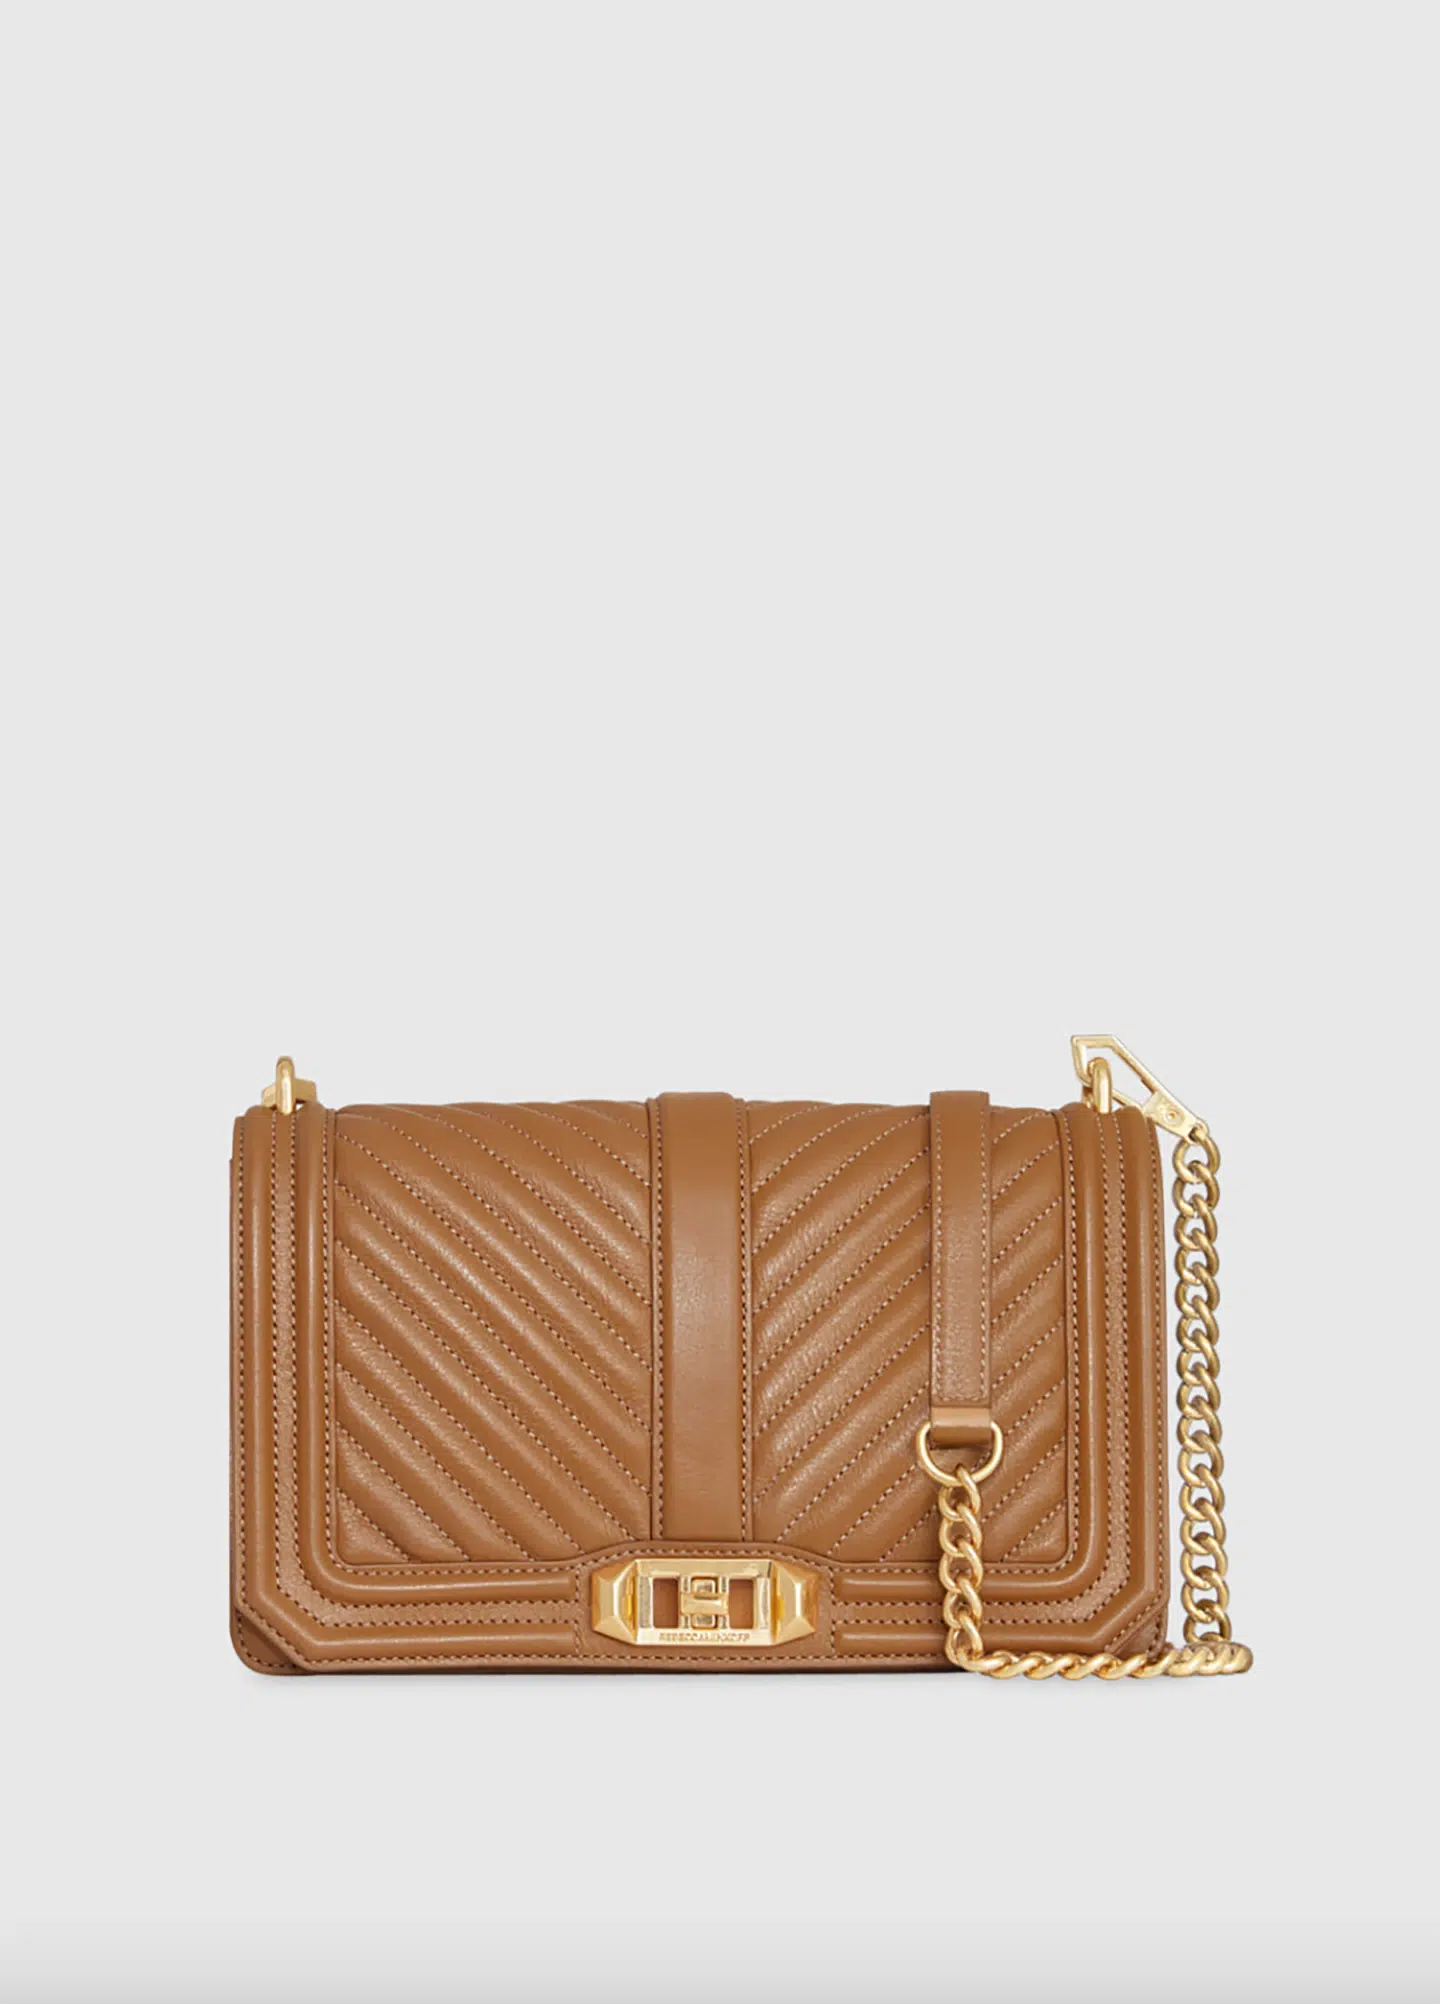 Top 10 YSL Dupe Bag Picks You HAVE to See: Get the Look